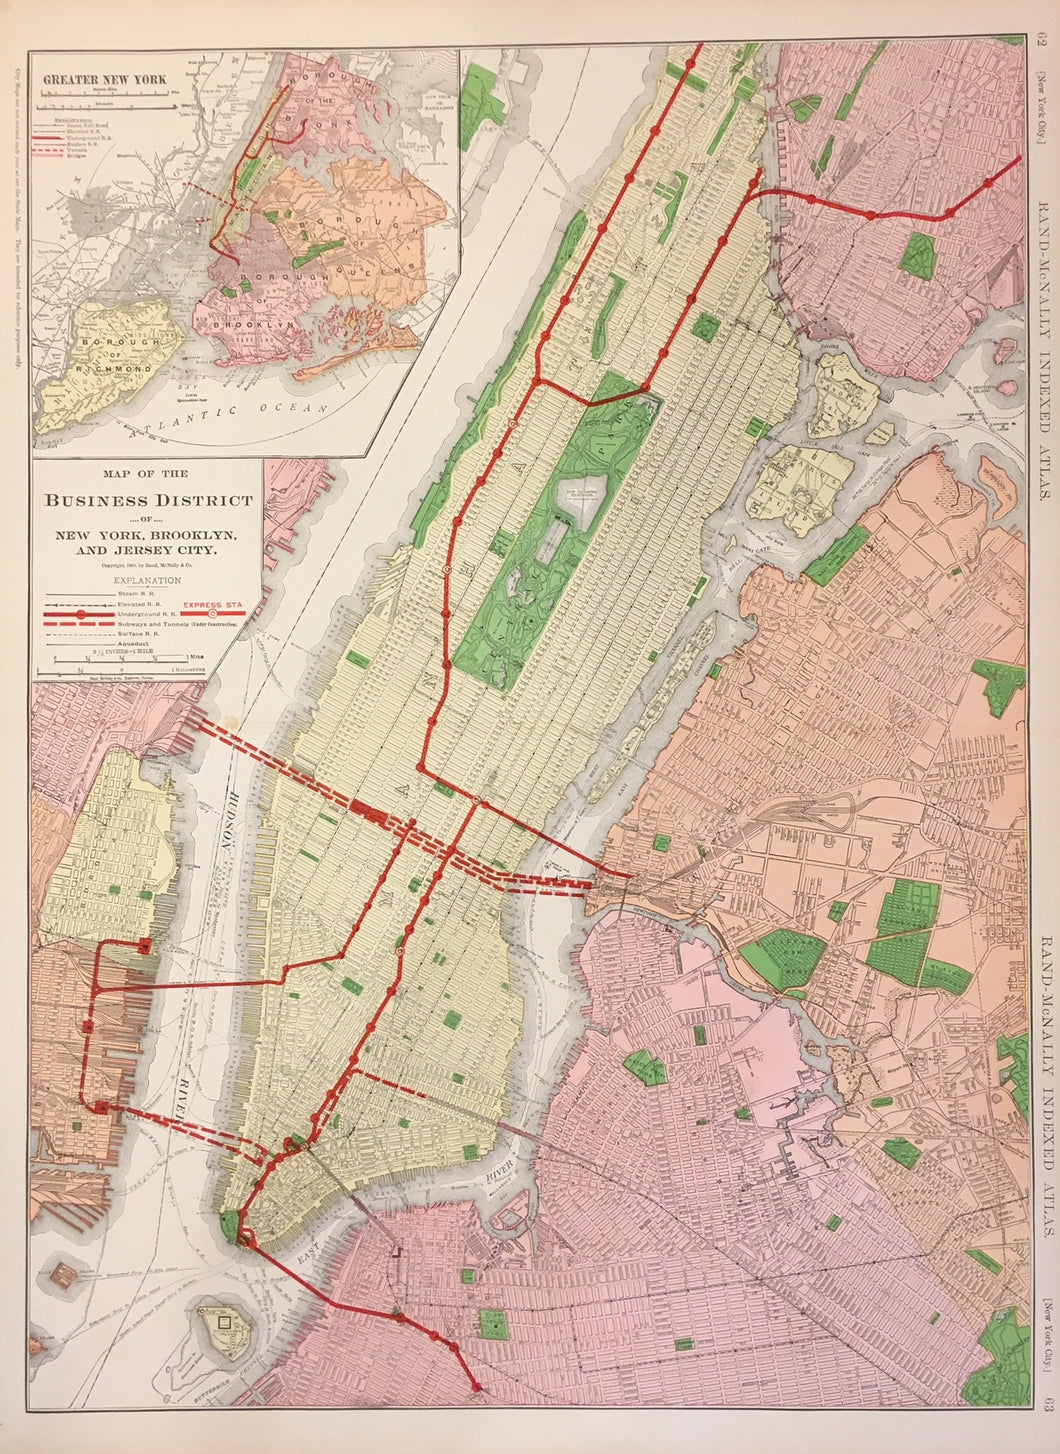 Rand McNally.  “Business District of New York/Brooklyn and Jersey City.”  [Shows elevated railways and subways]